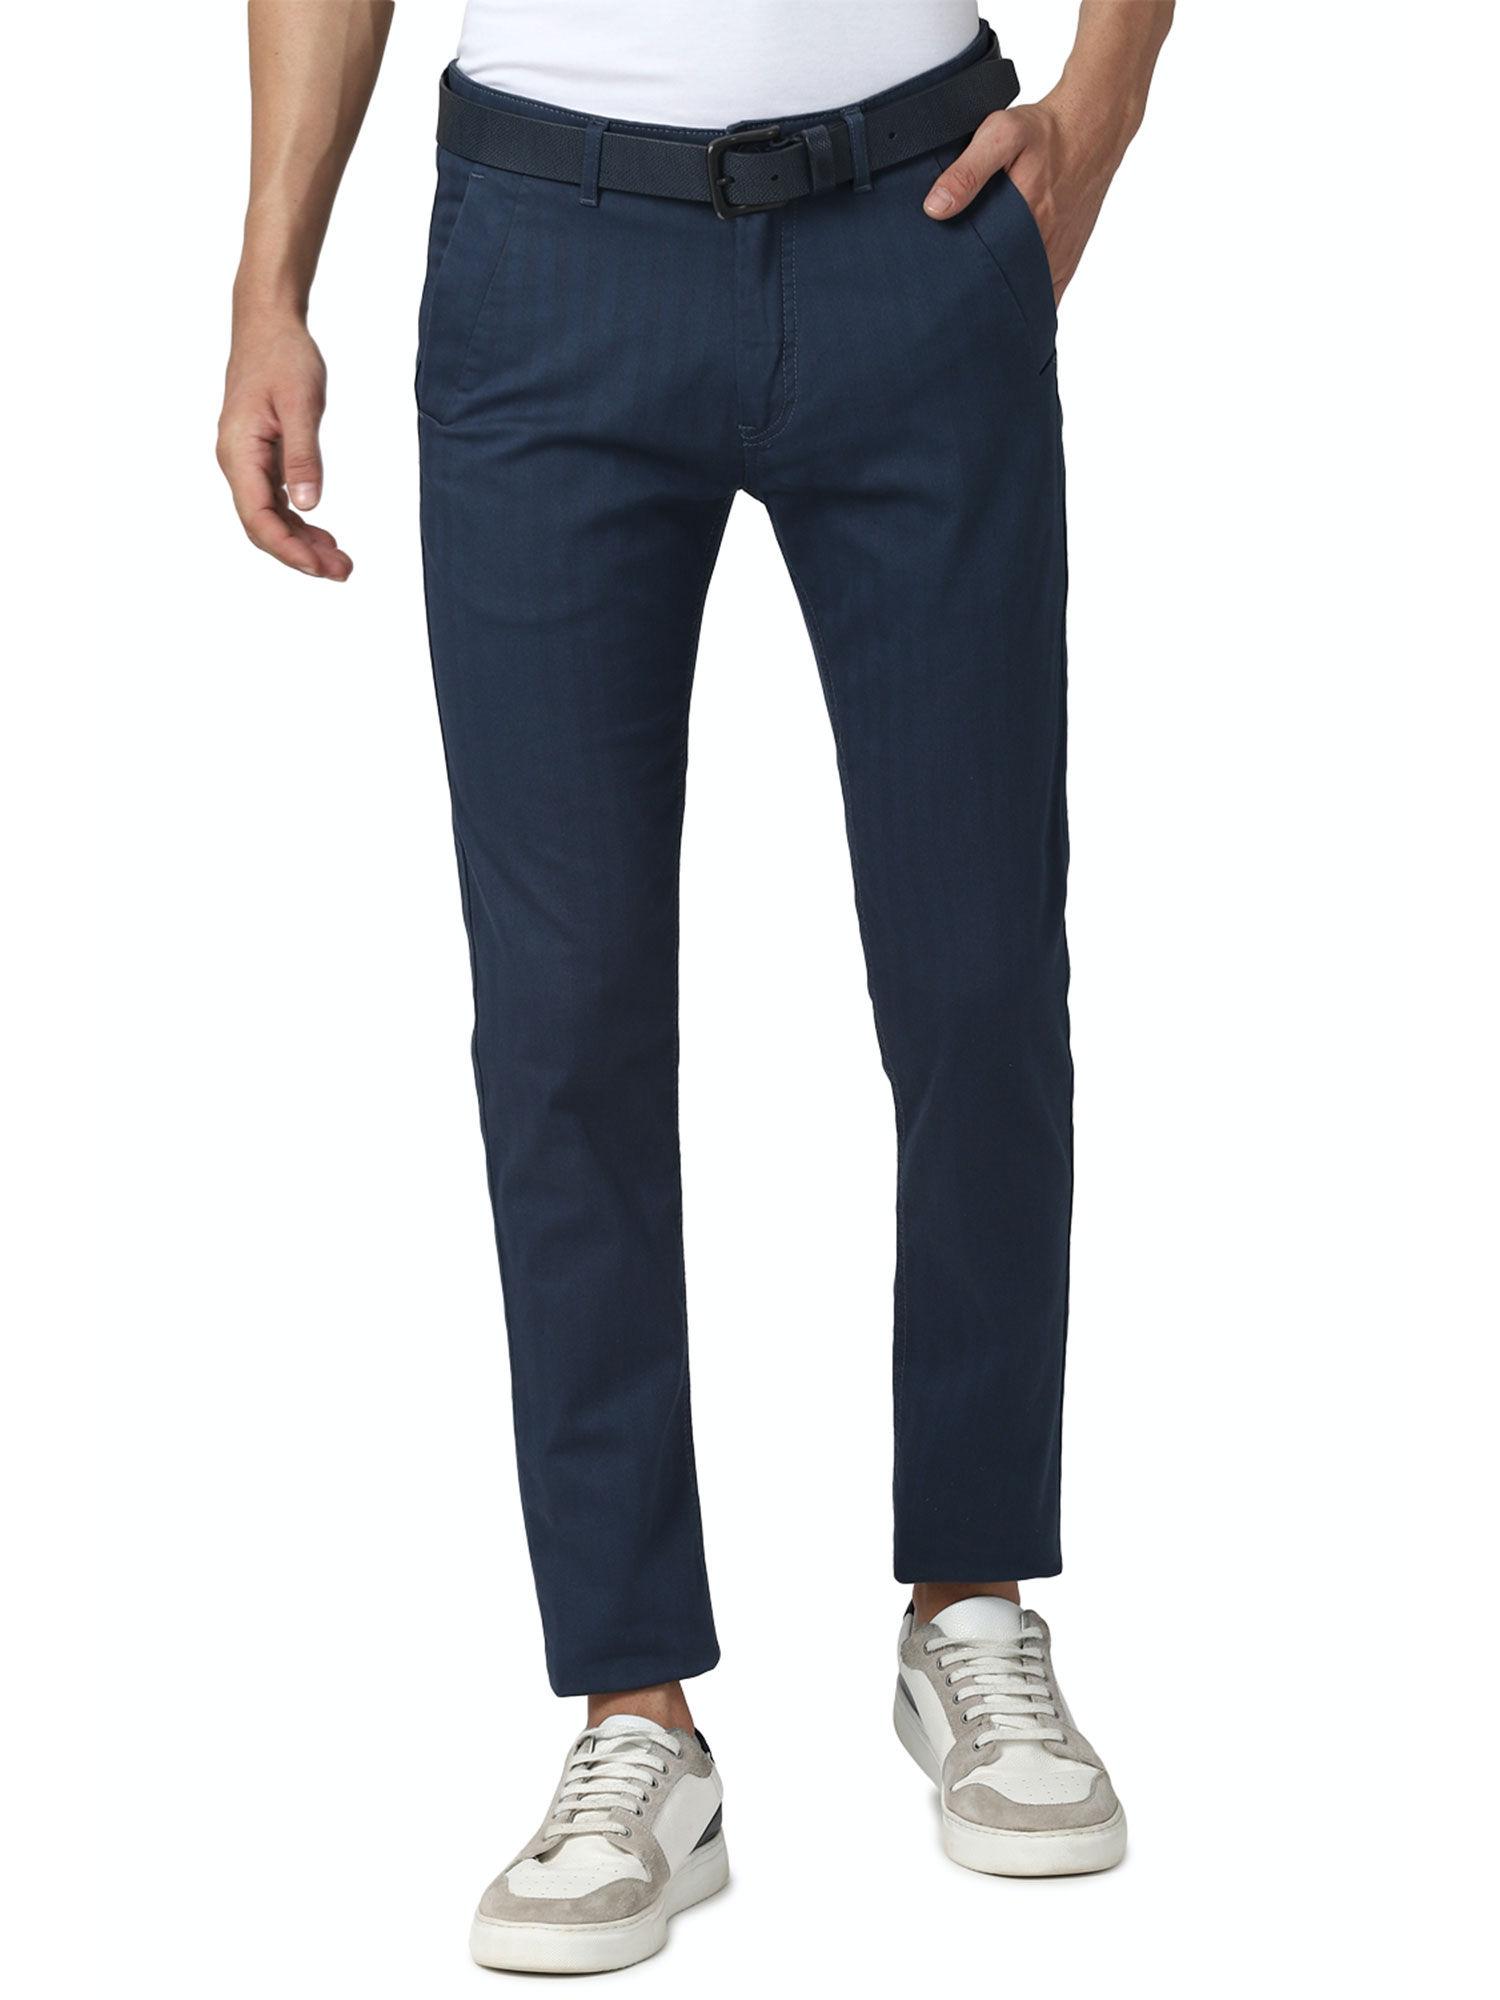 navy blue casual trouser